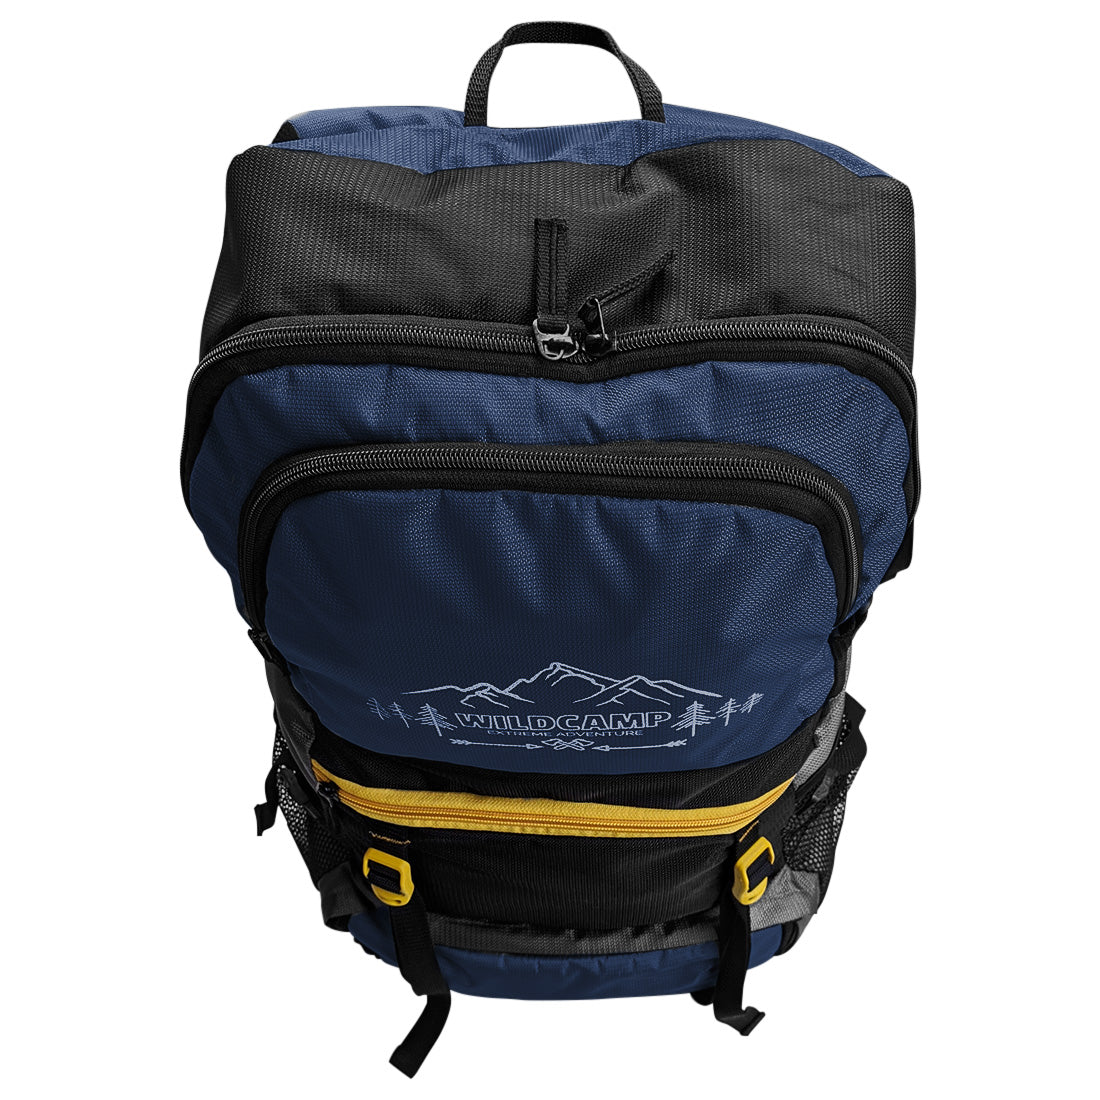 Can anyone recommend a good “cabin luggage” backpack. Must have suitcase  sleeve for when I am also checking a bag. I like the Stubbleandco Adventure  bag but if I'm spending that much